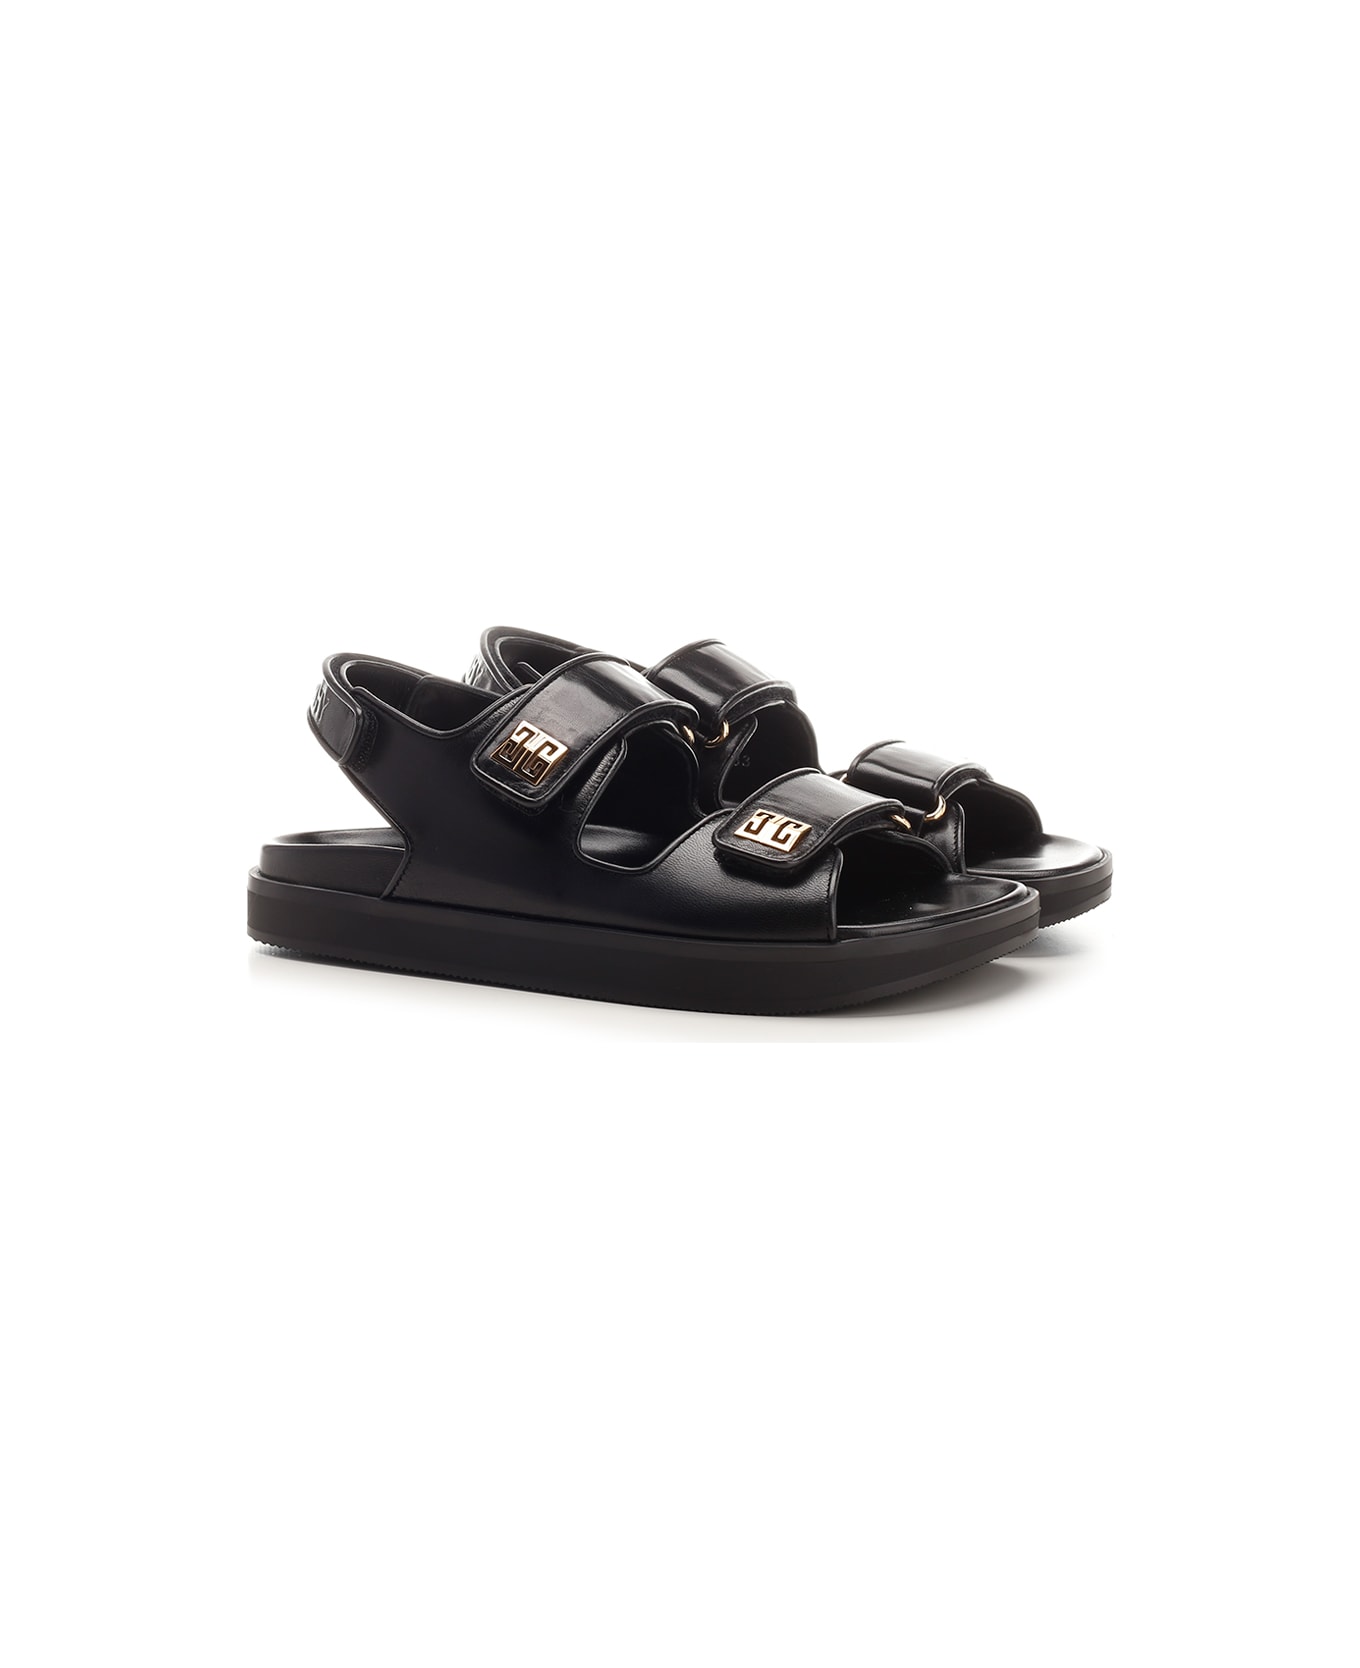 Givenchy 4g Leather Sandals - black サンダル